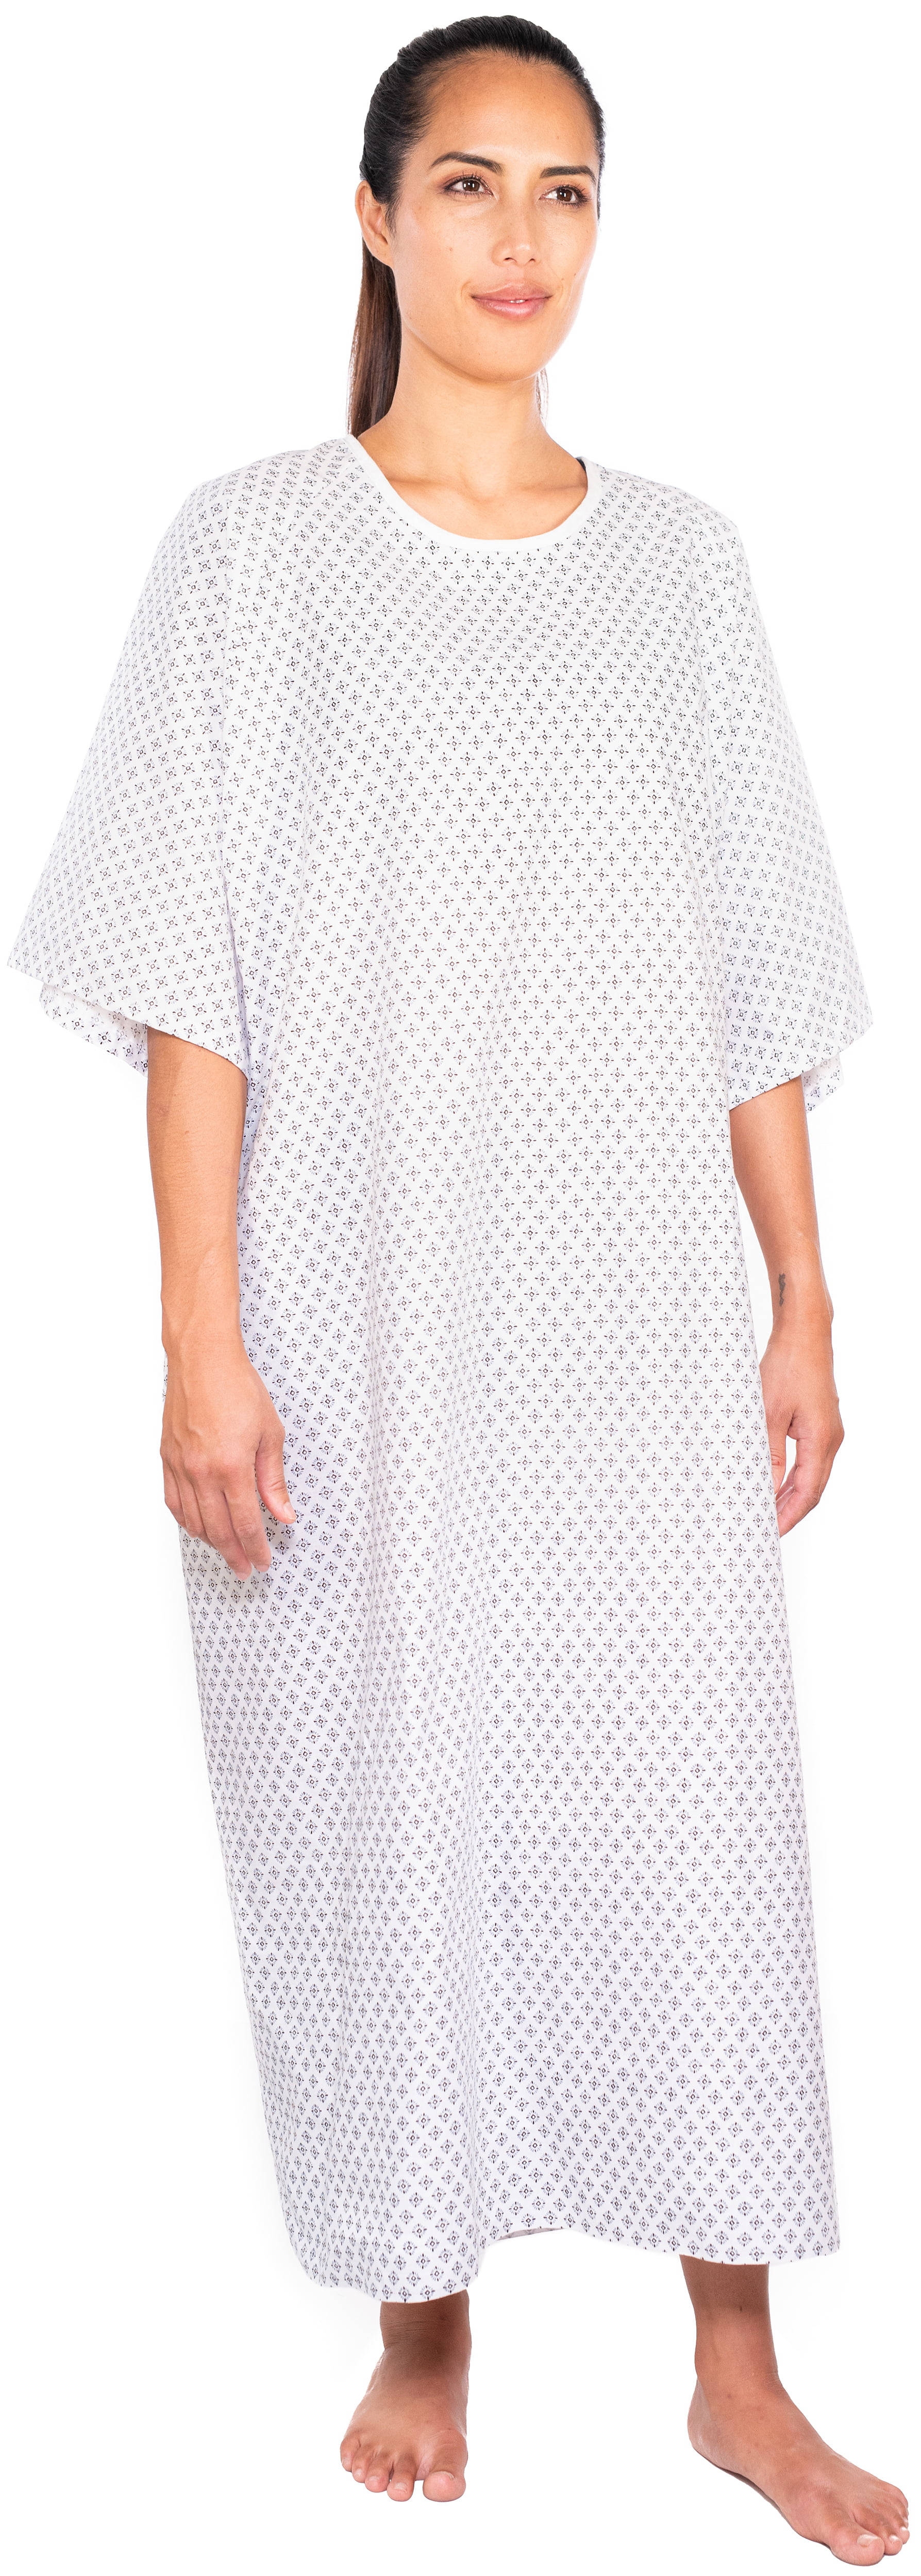 Hospital Gown Back Tie White Blue or White Clothing Womens Clothing Pyjamas & Robes Hospital Gowns 3 Pack 